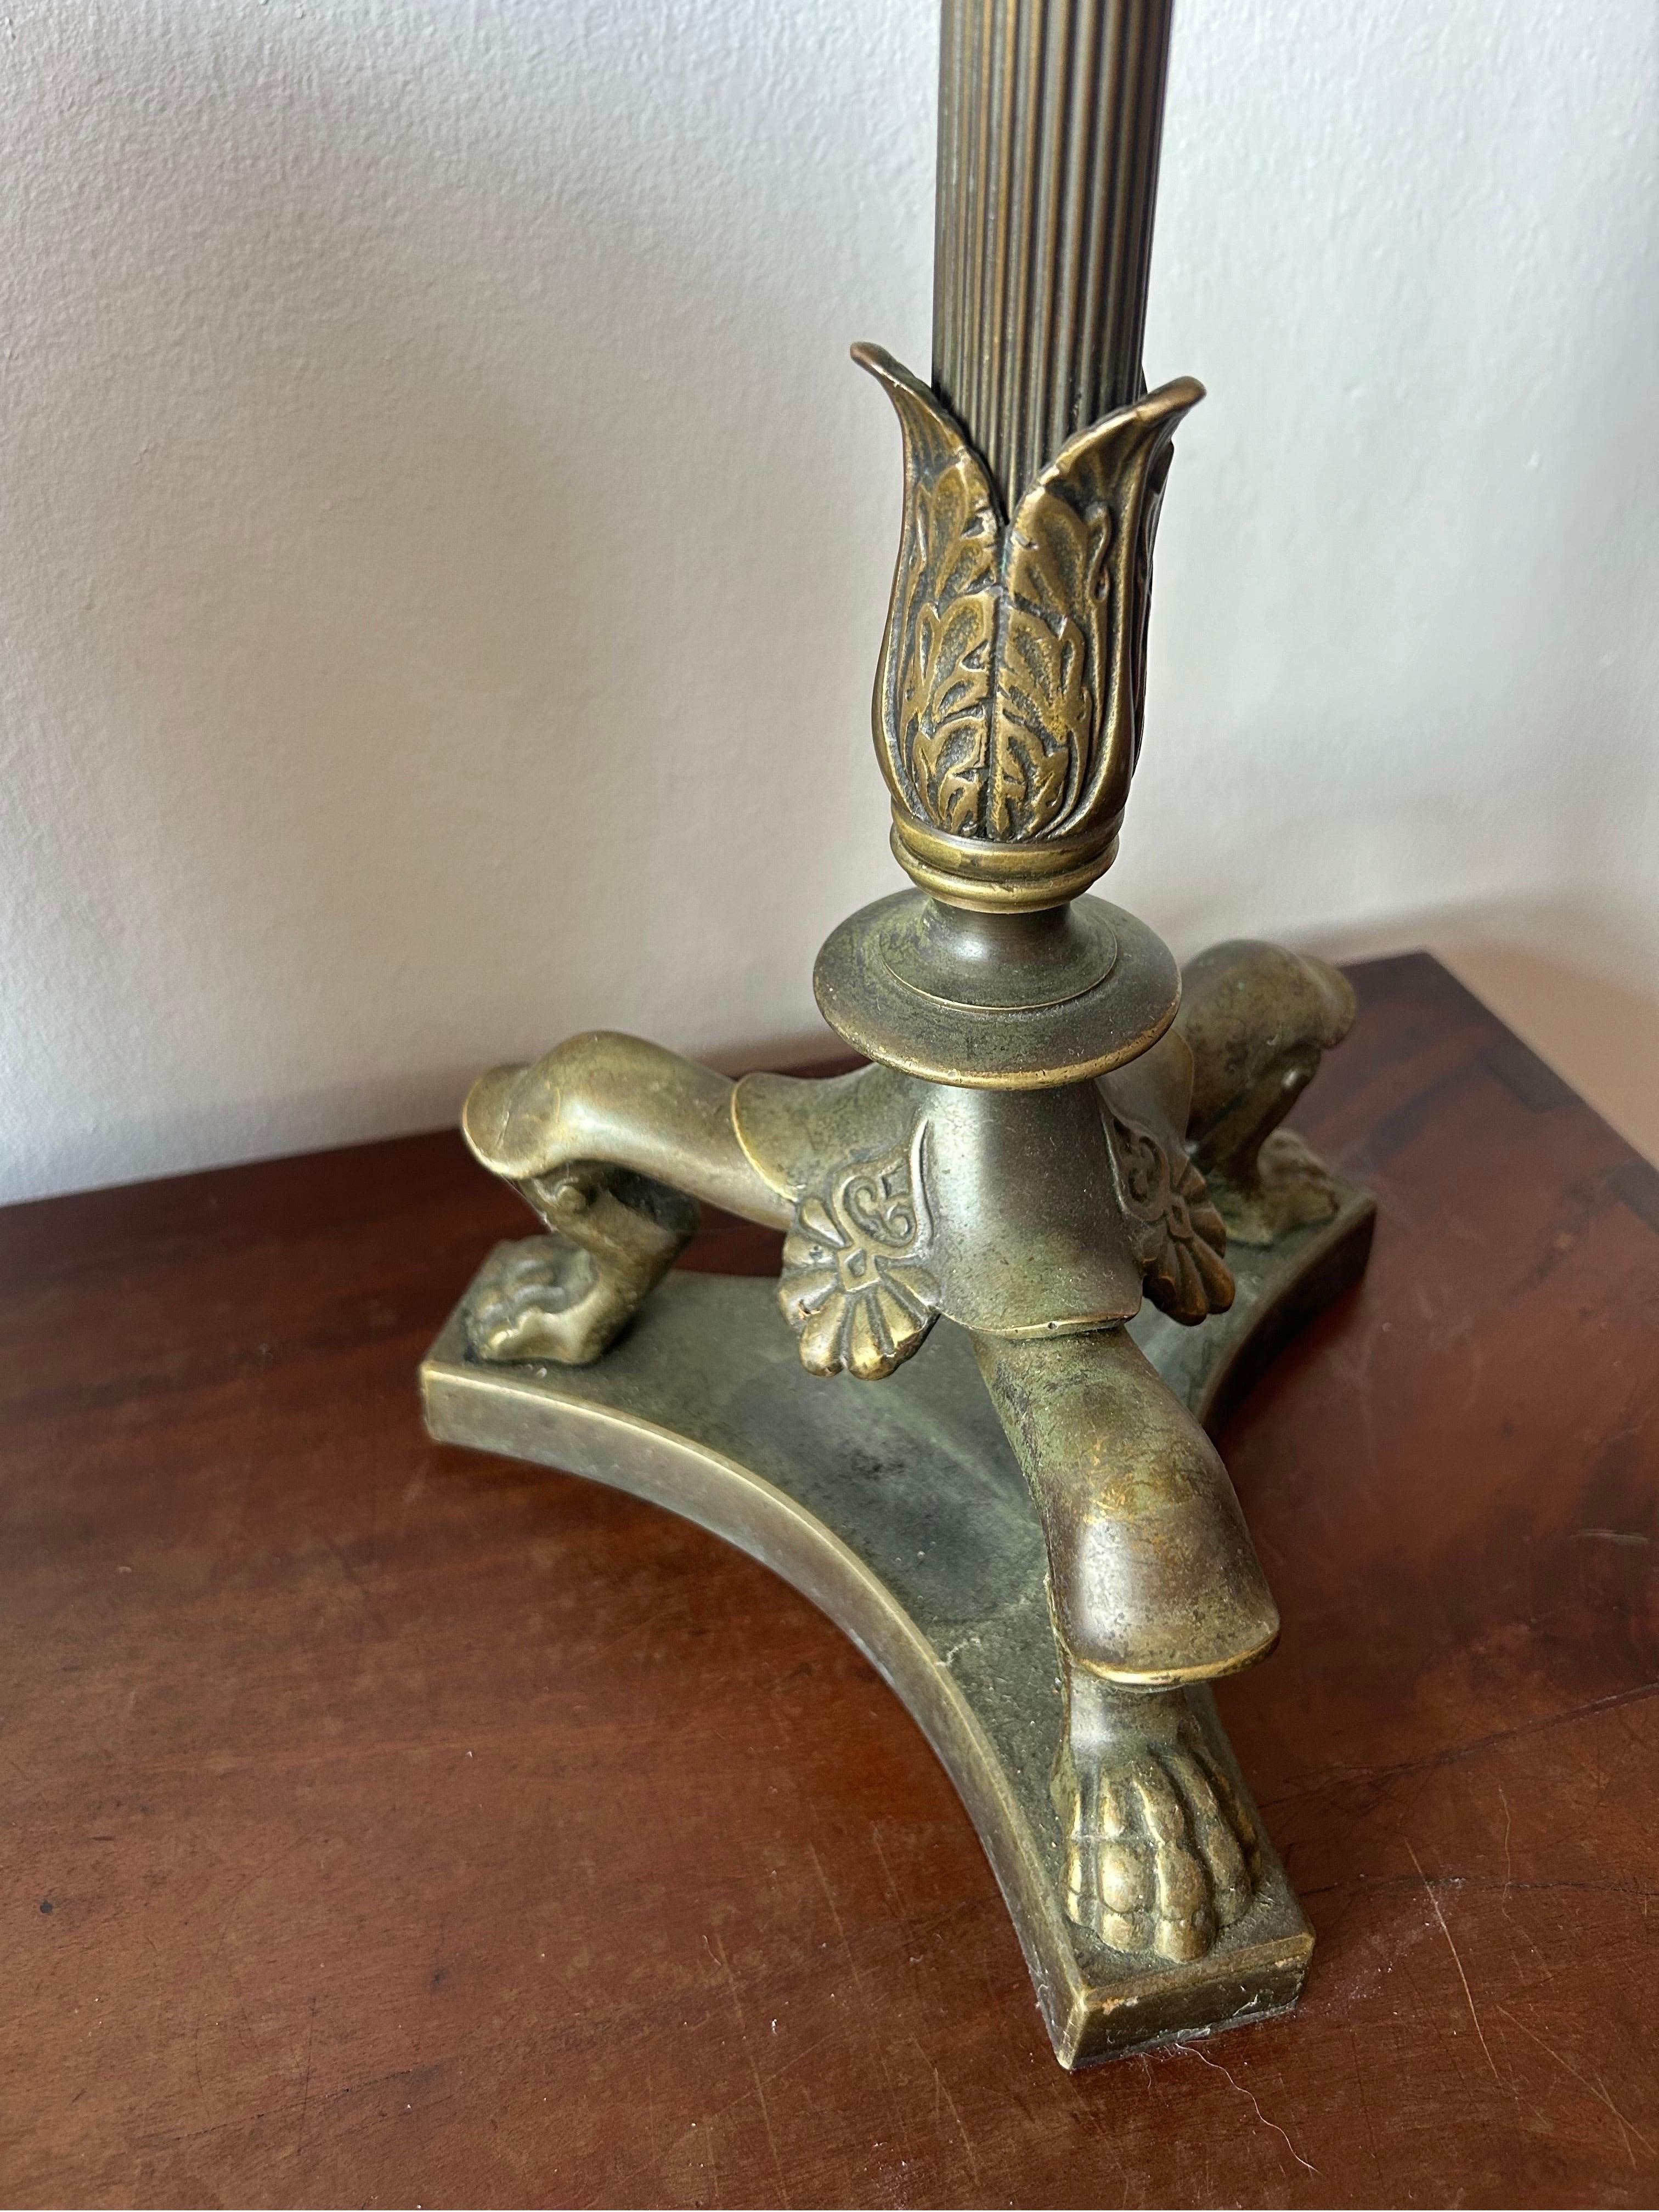 Mid-19th Century Bronze Table Lamp by Danish Sculptor TH Stein Denmark 1850’s For Sale